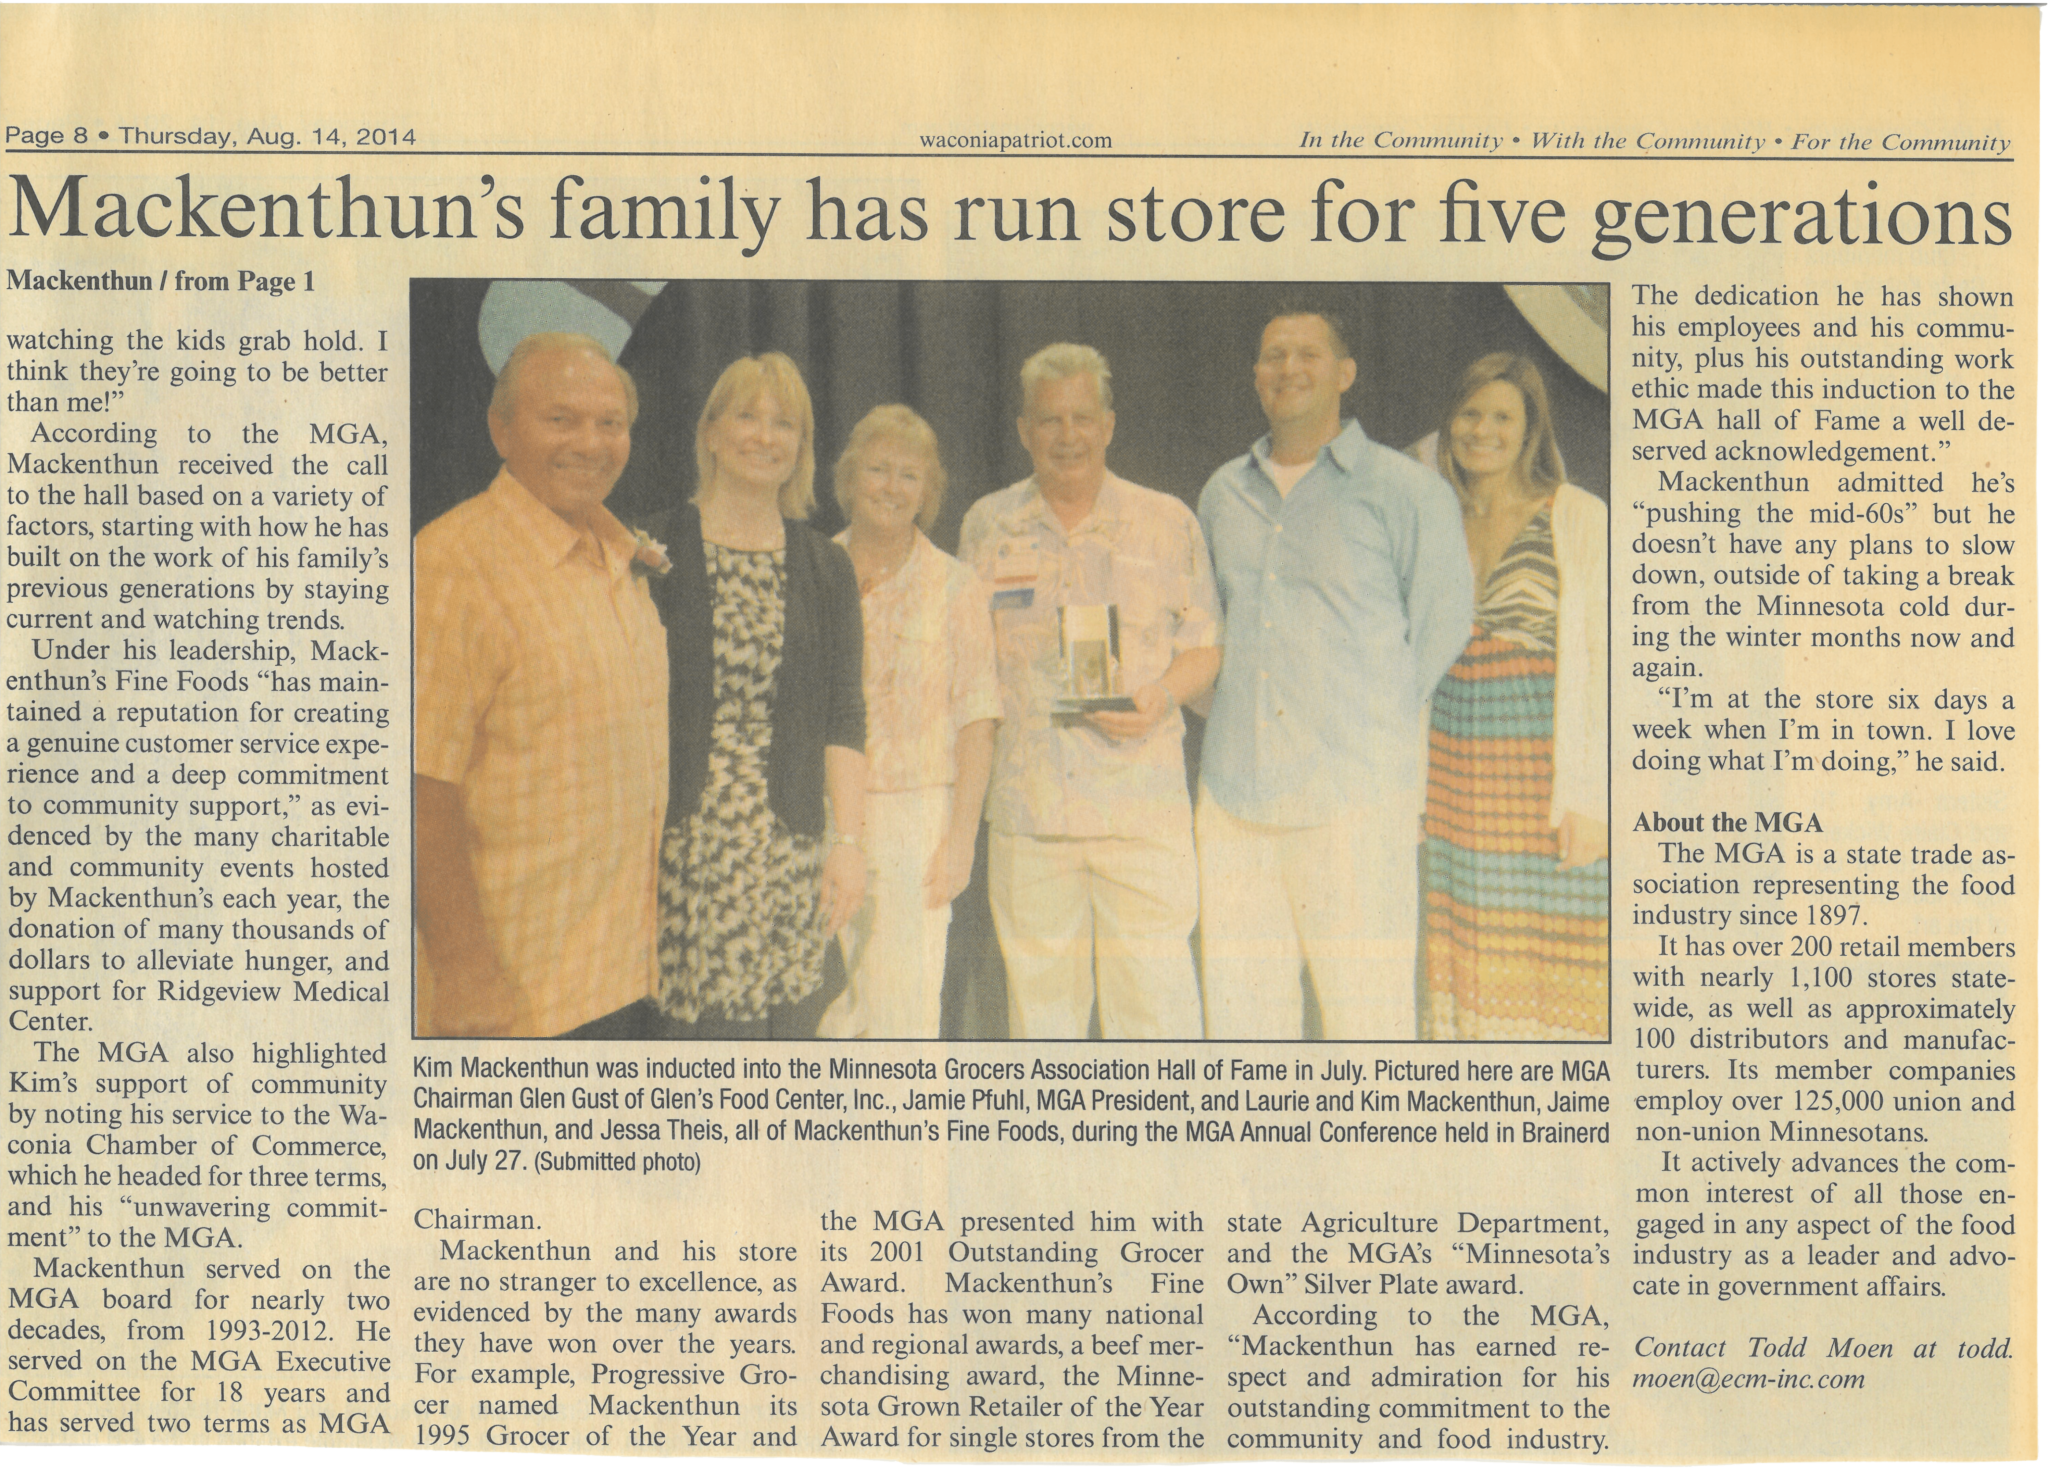 2014 Newspaper clipping, Mackenthun's family has run store for five generations